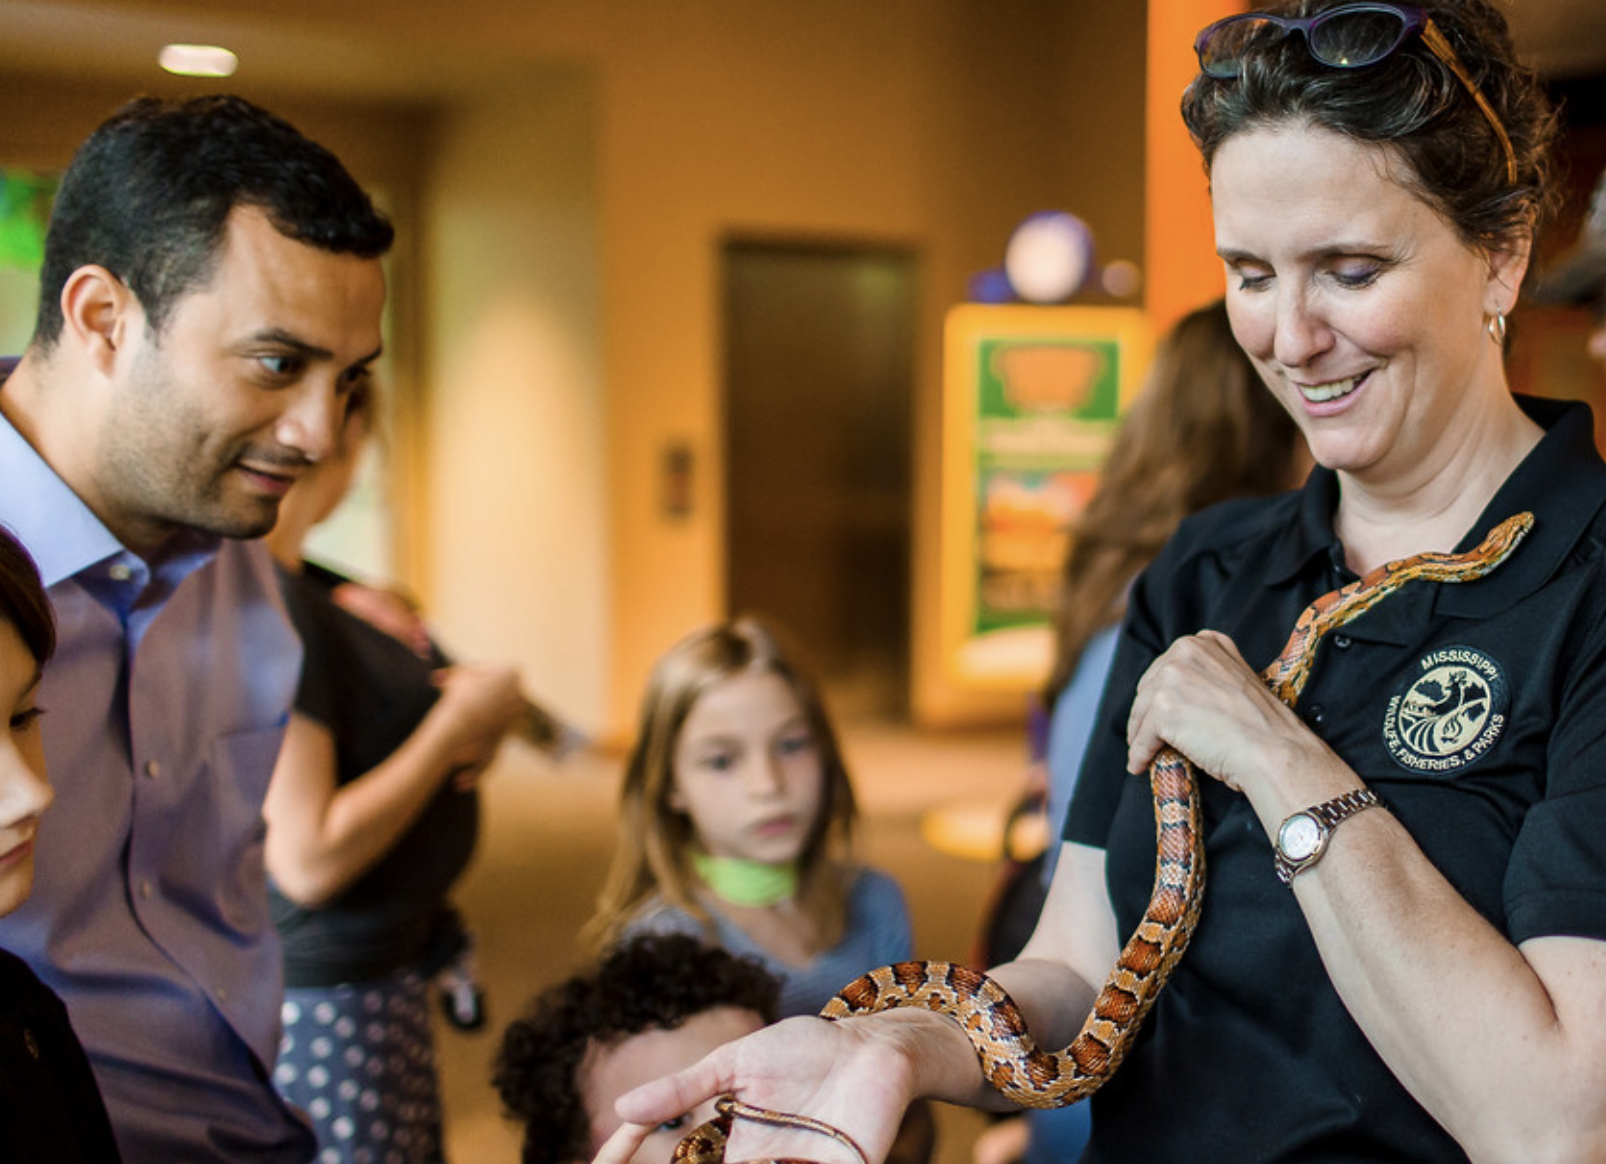 Museum of Natural Science Welcomes New Exhibit for World Snake Day: Slithering Serpents